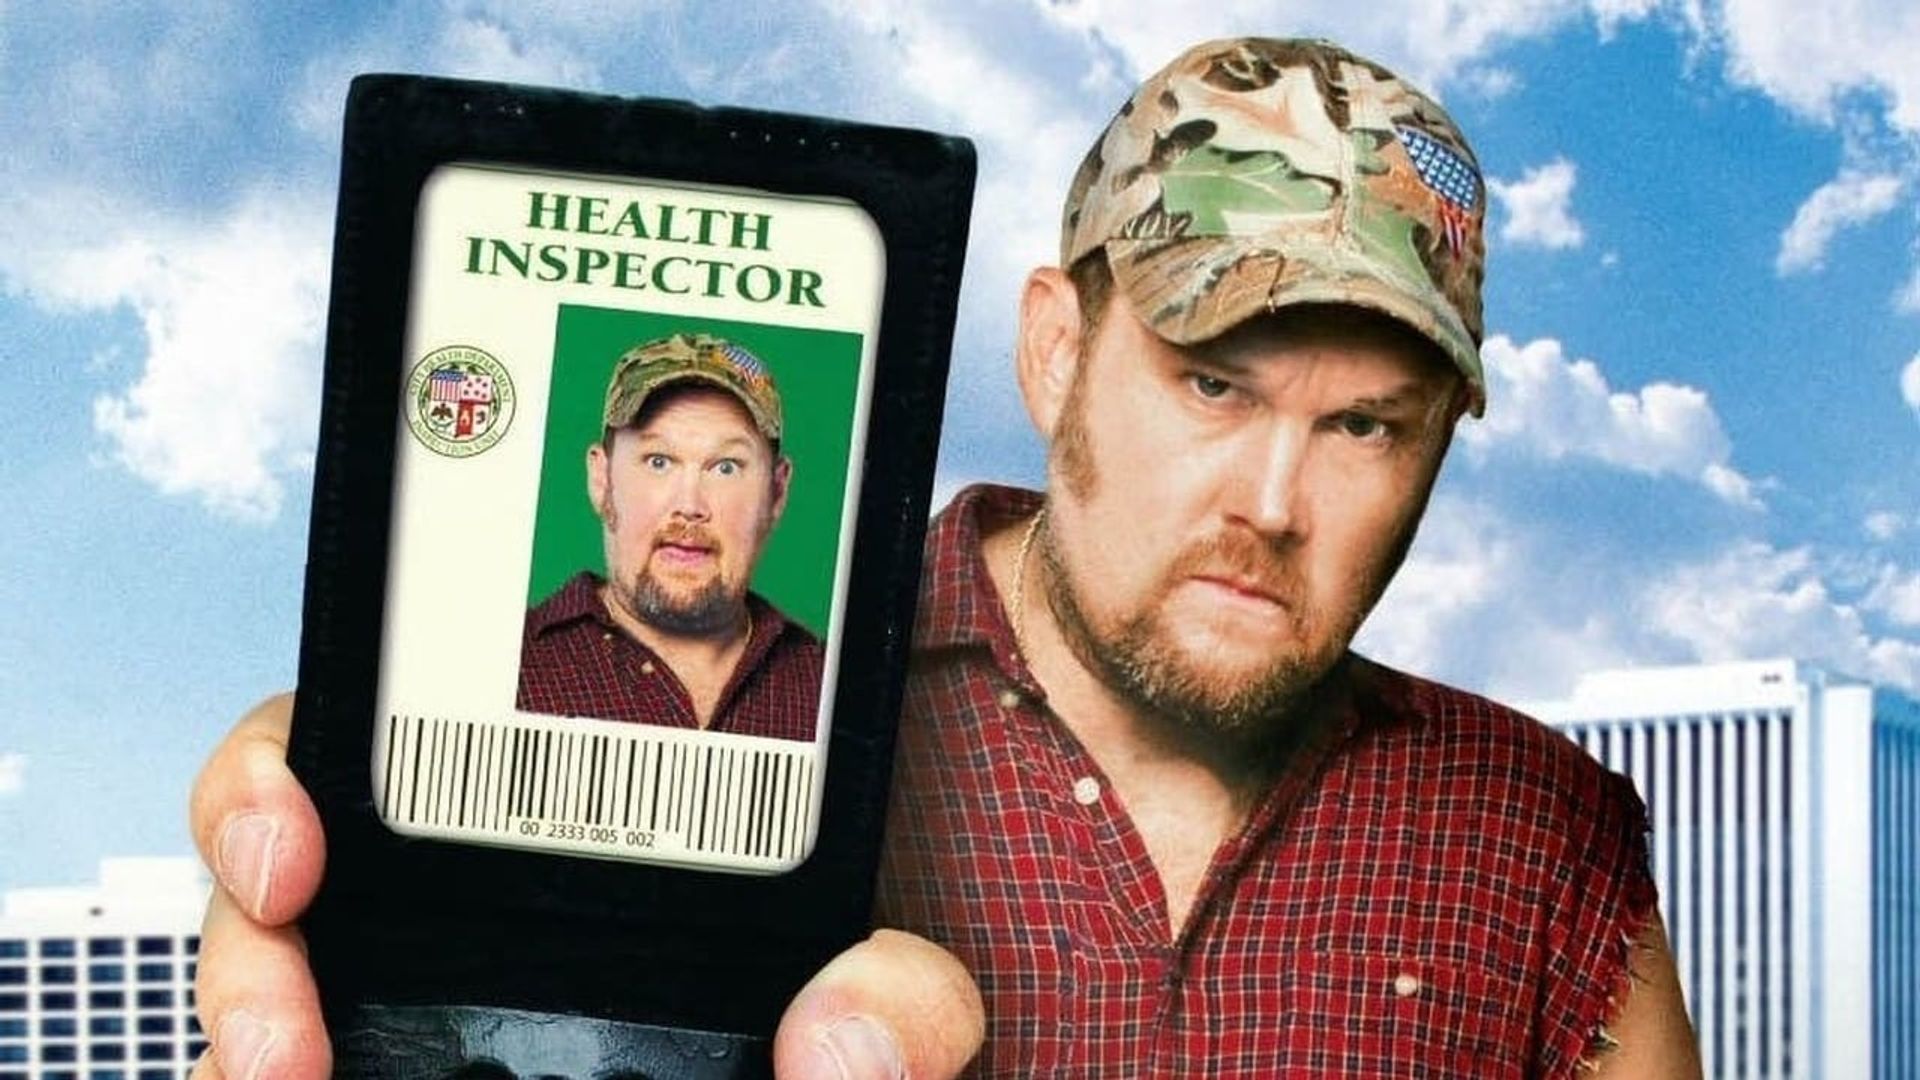 Larry the Cable Guy: Health Inspector background